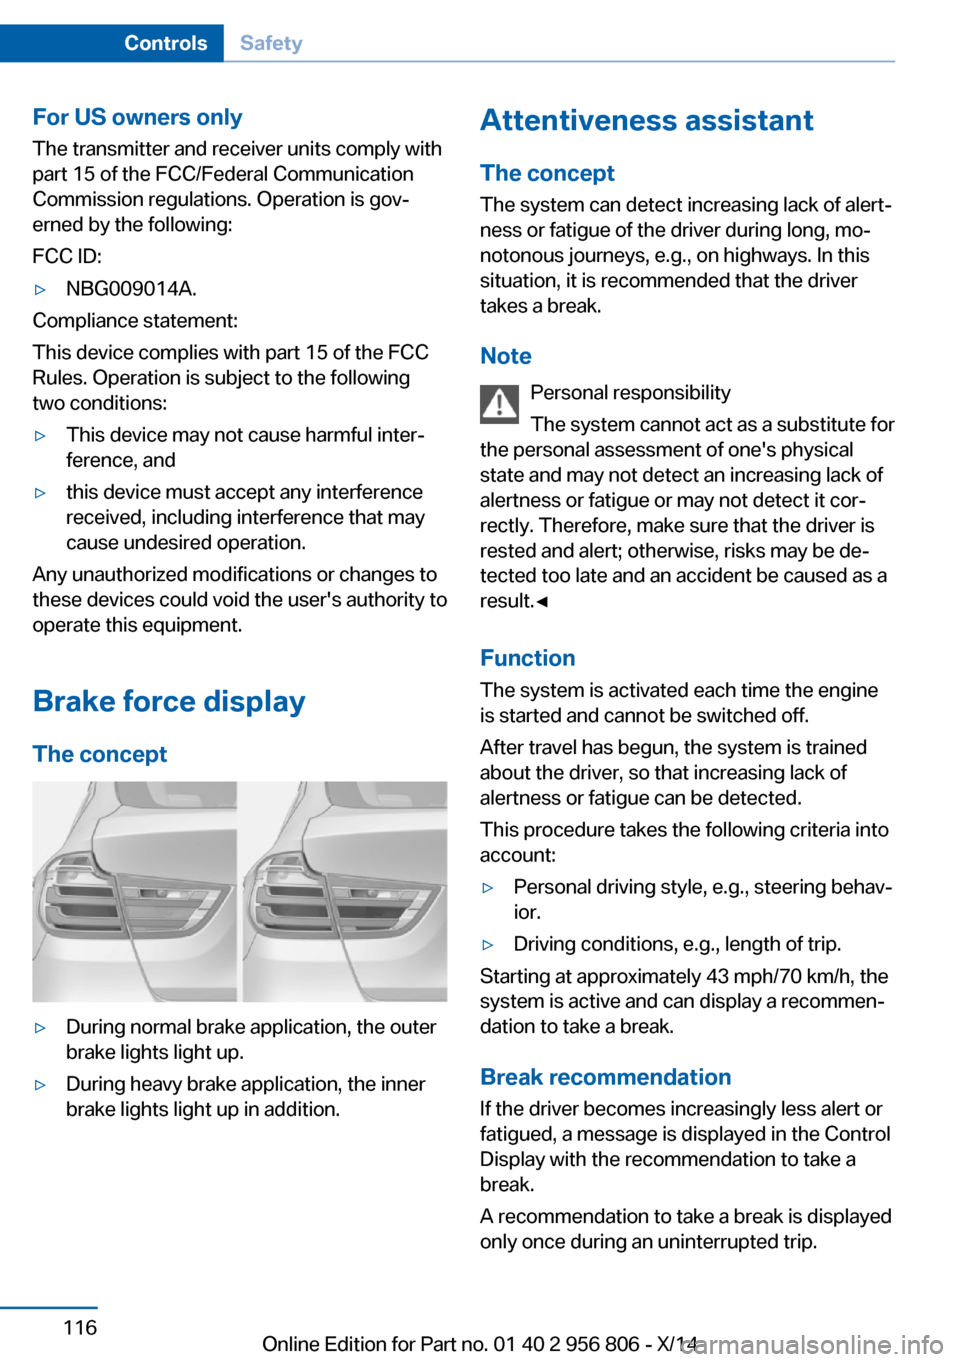 BMW 3 SERIES GRAN COUPE 2014 F34 Owners Manual For US owners only
The transmitter and receiver units comply with
part 15 of the FCC/Federal Communication
Commission regulations. Operation is gov‐
erned by the following:
FCC ID:▷NBG009014A.
Com